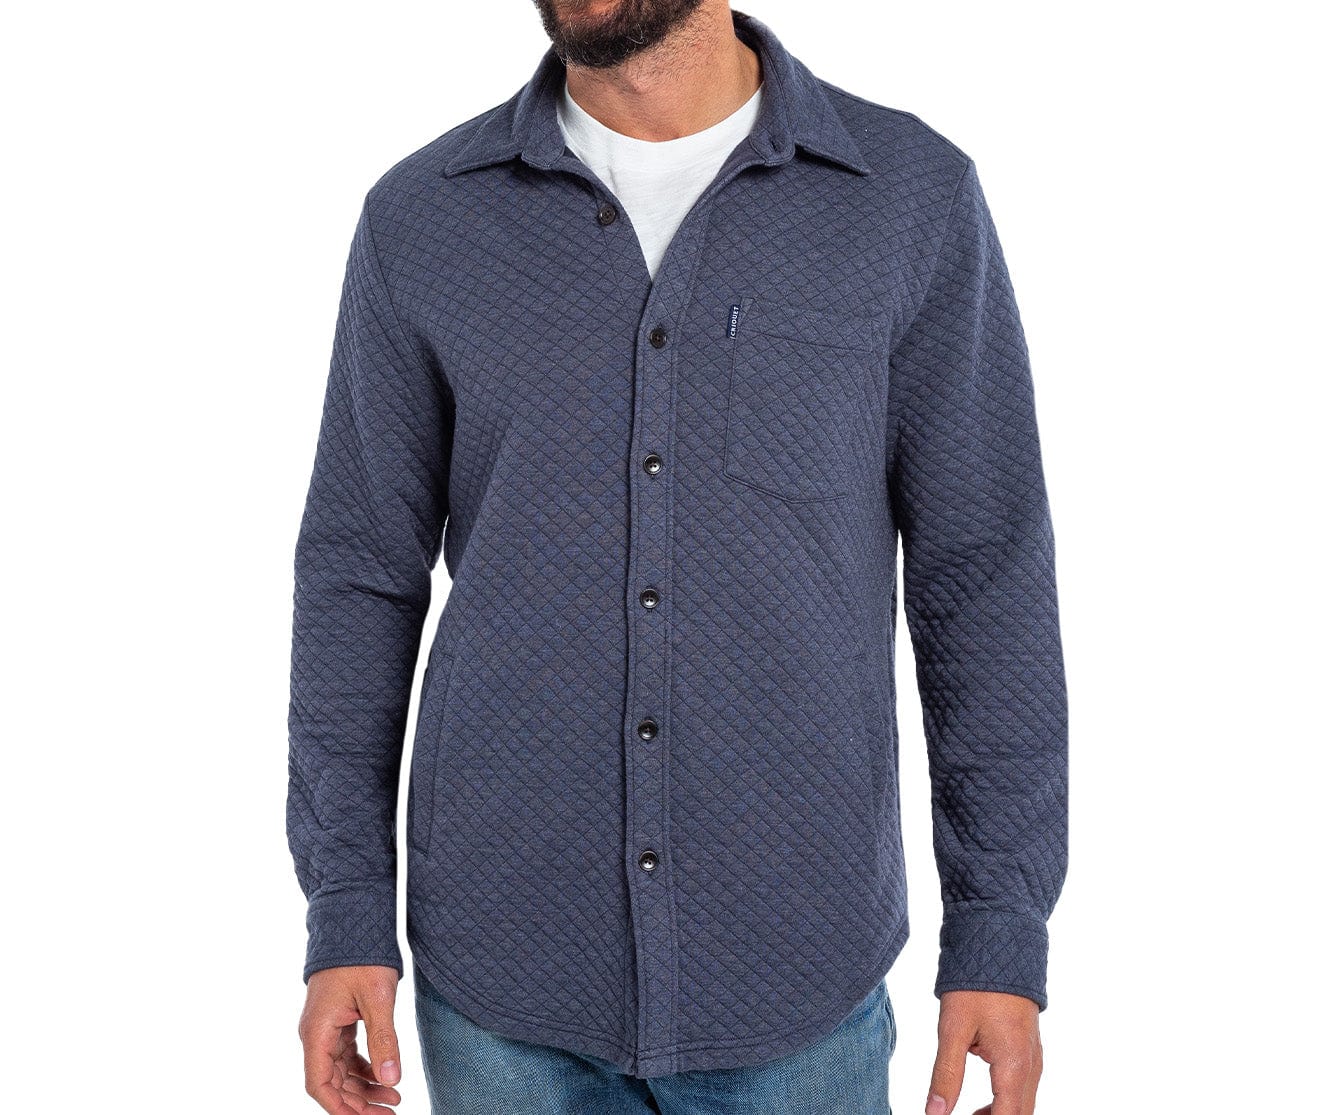 Quilted Knit Overshirt - Heather Navy - Secondary